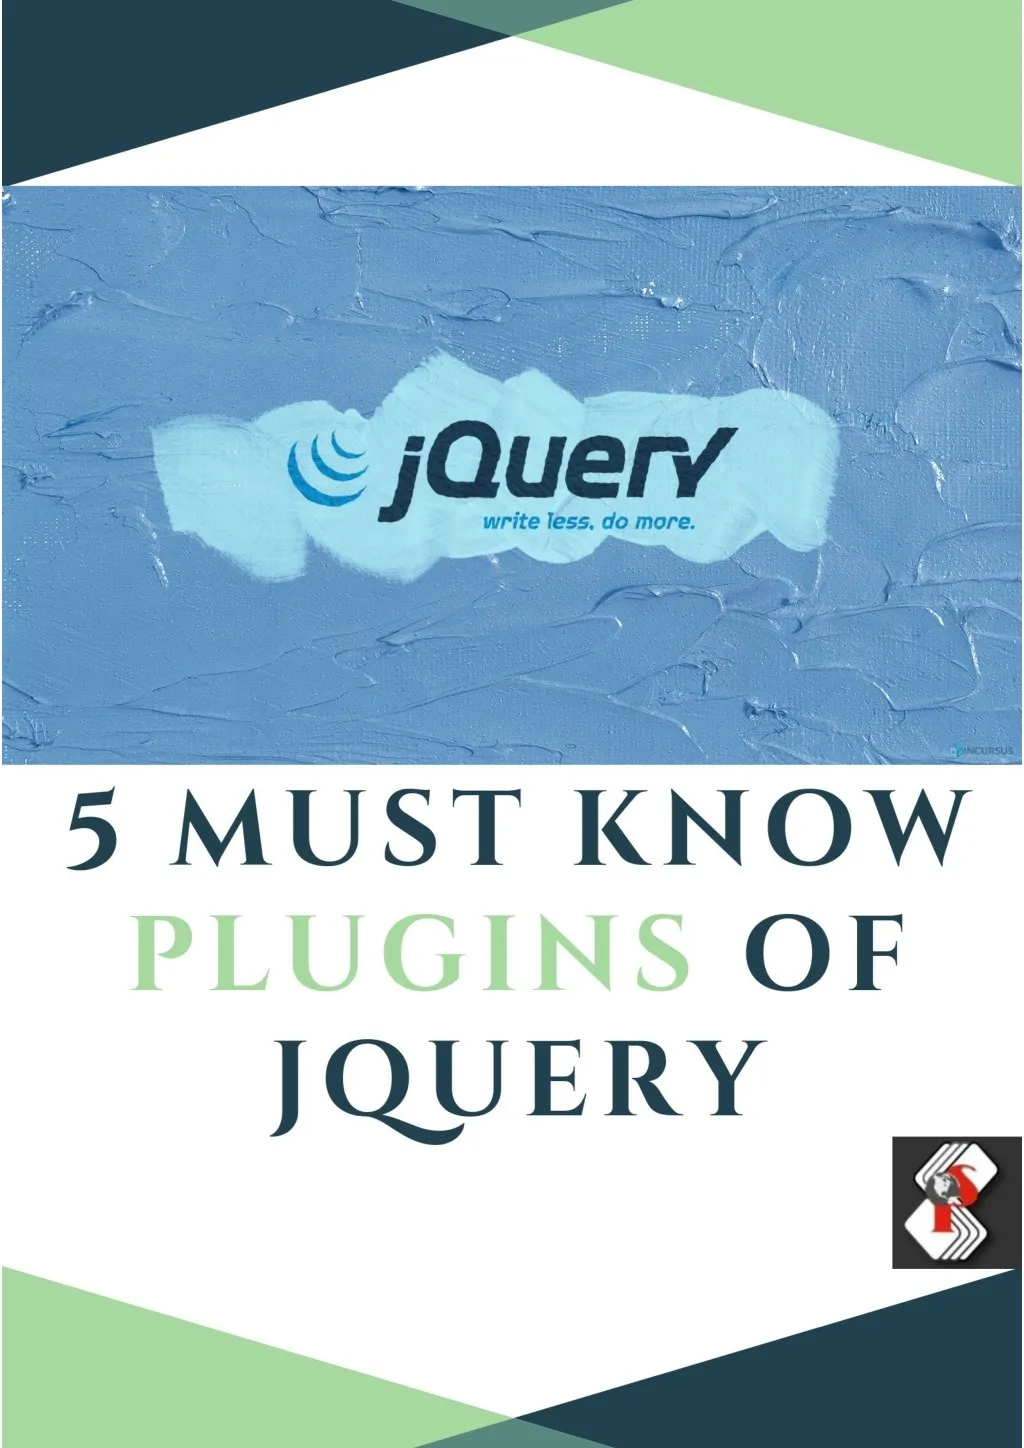 5 must know plug ins of jquery